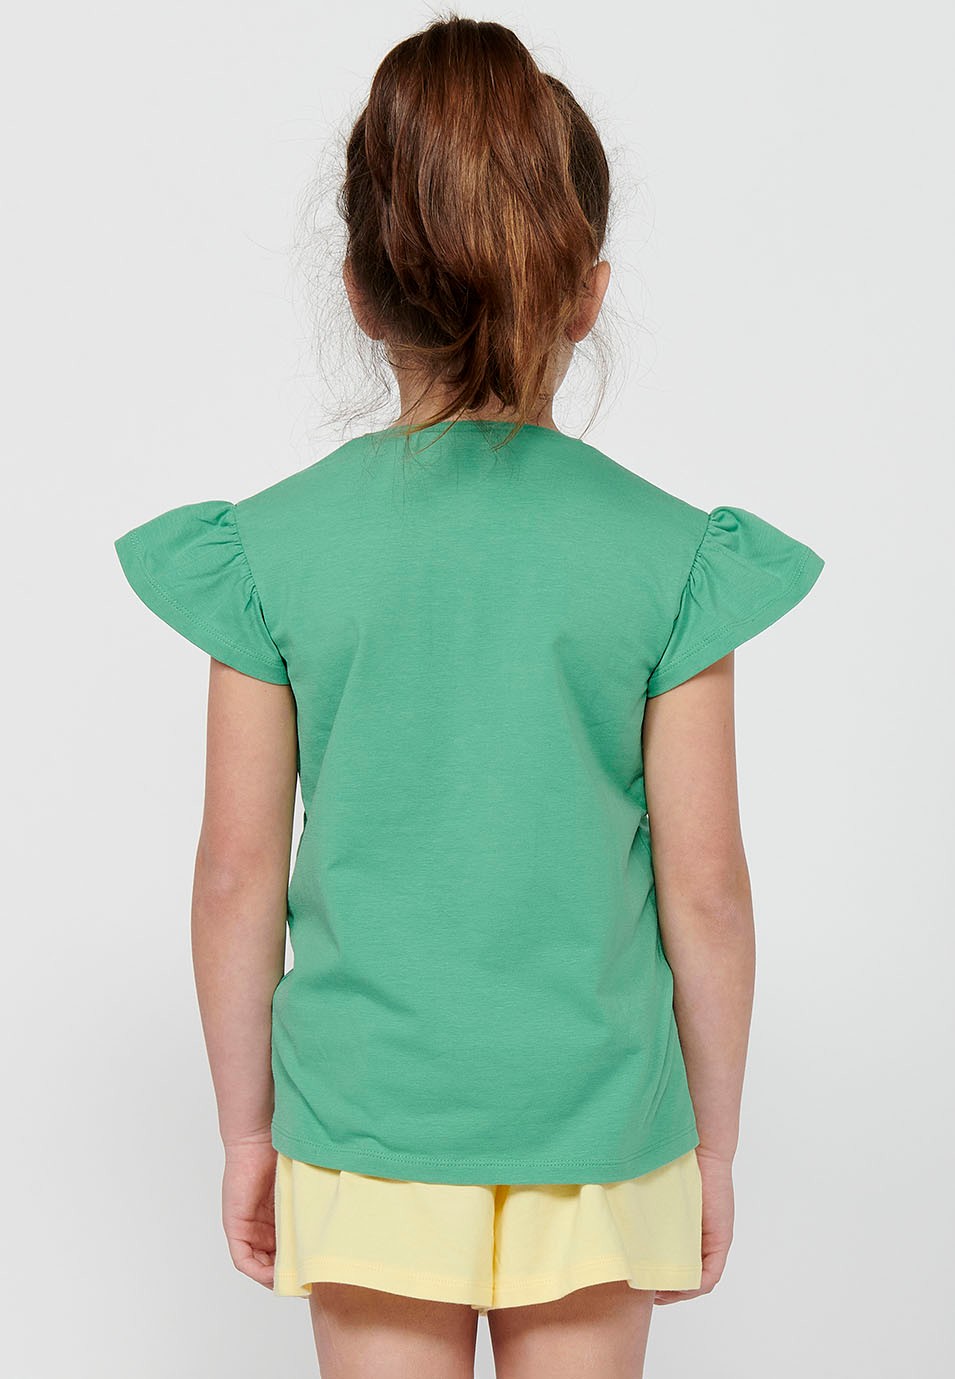 Girl's Round Neck Top with Double Ruffle Short Sleeve and Green Front Print